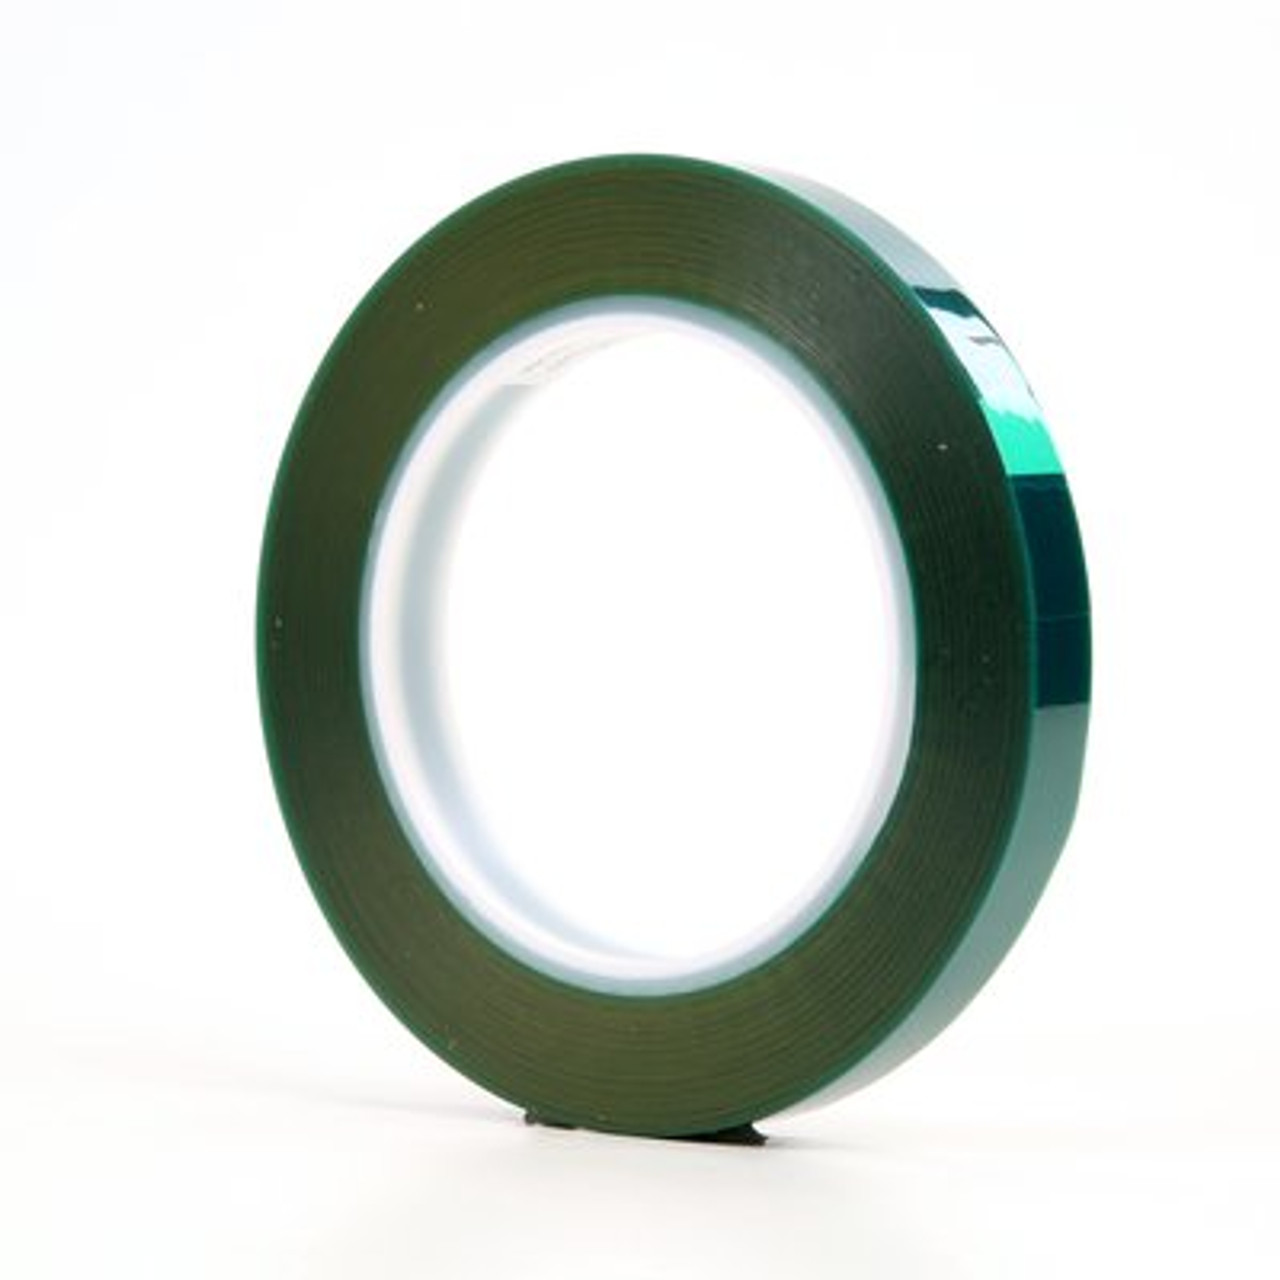 3M™ Polyester Tape 8992, Green, 1/2 in x 72 yd, 3.2 mil